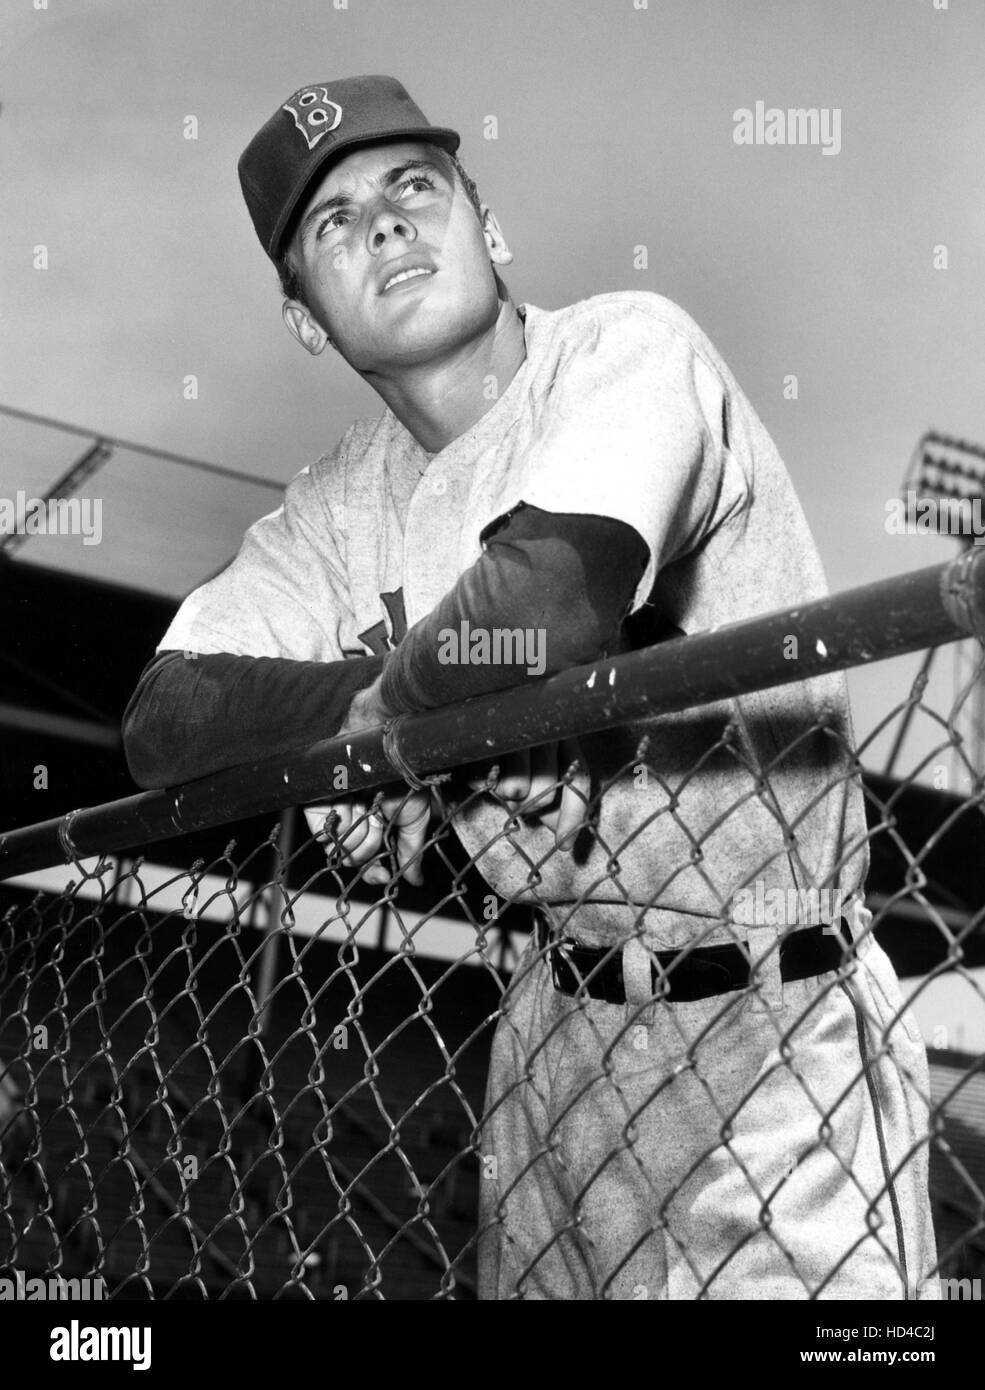 CLIMAX!, Tab Hunter in Folge "Fear Strikes Out", ausgestrahlt Saison 1, August 1955. 1954-1958. Stockfoto